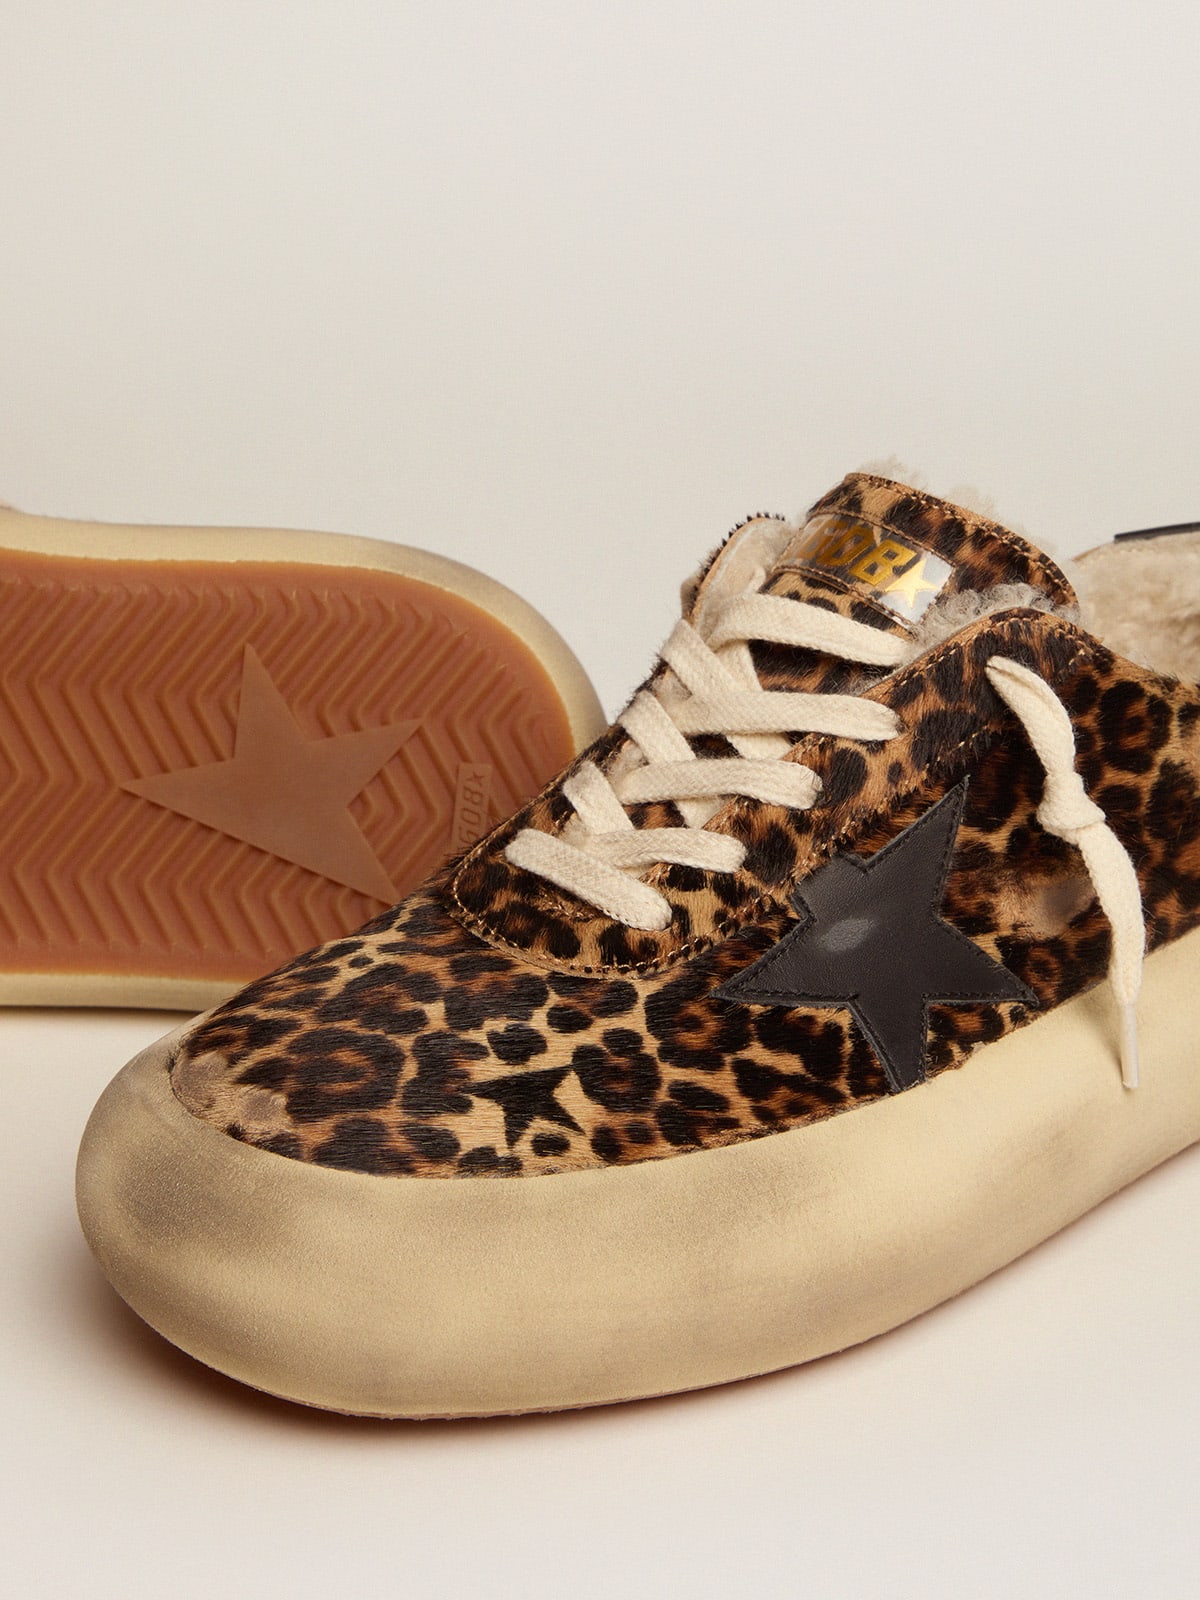 Golden Goose - Men's Space-Star shoes in animal-print pony skin with shearling lining in 